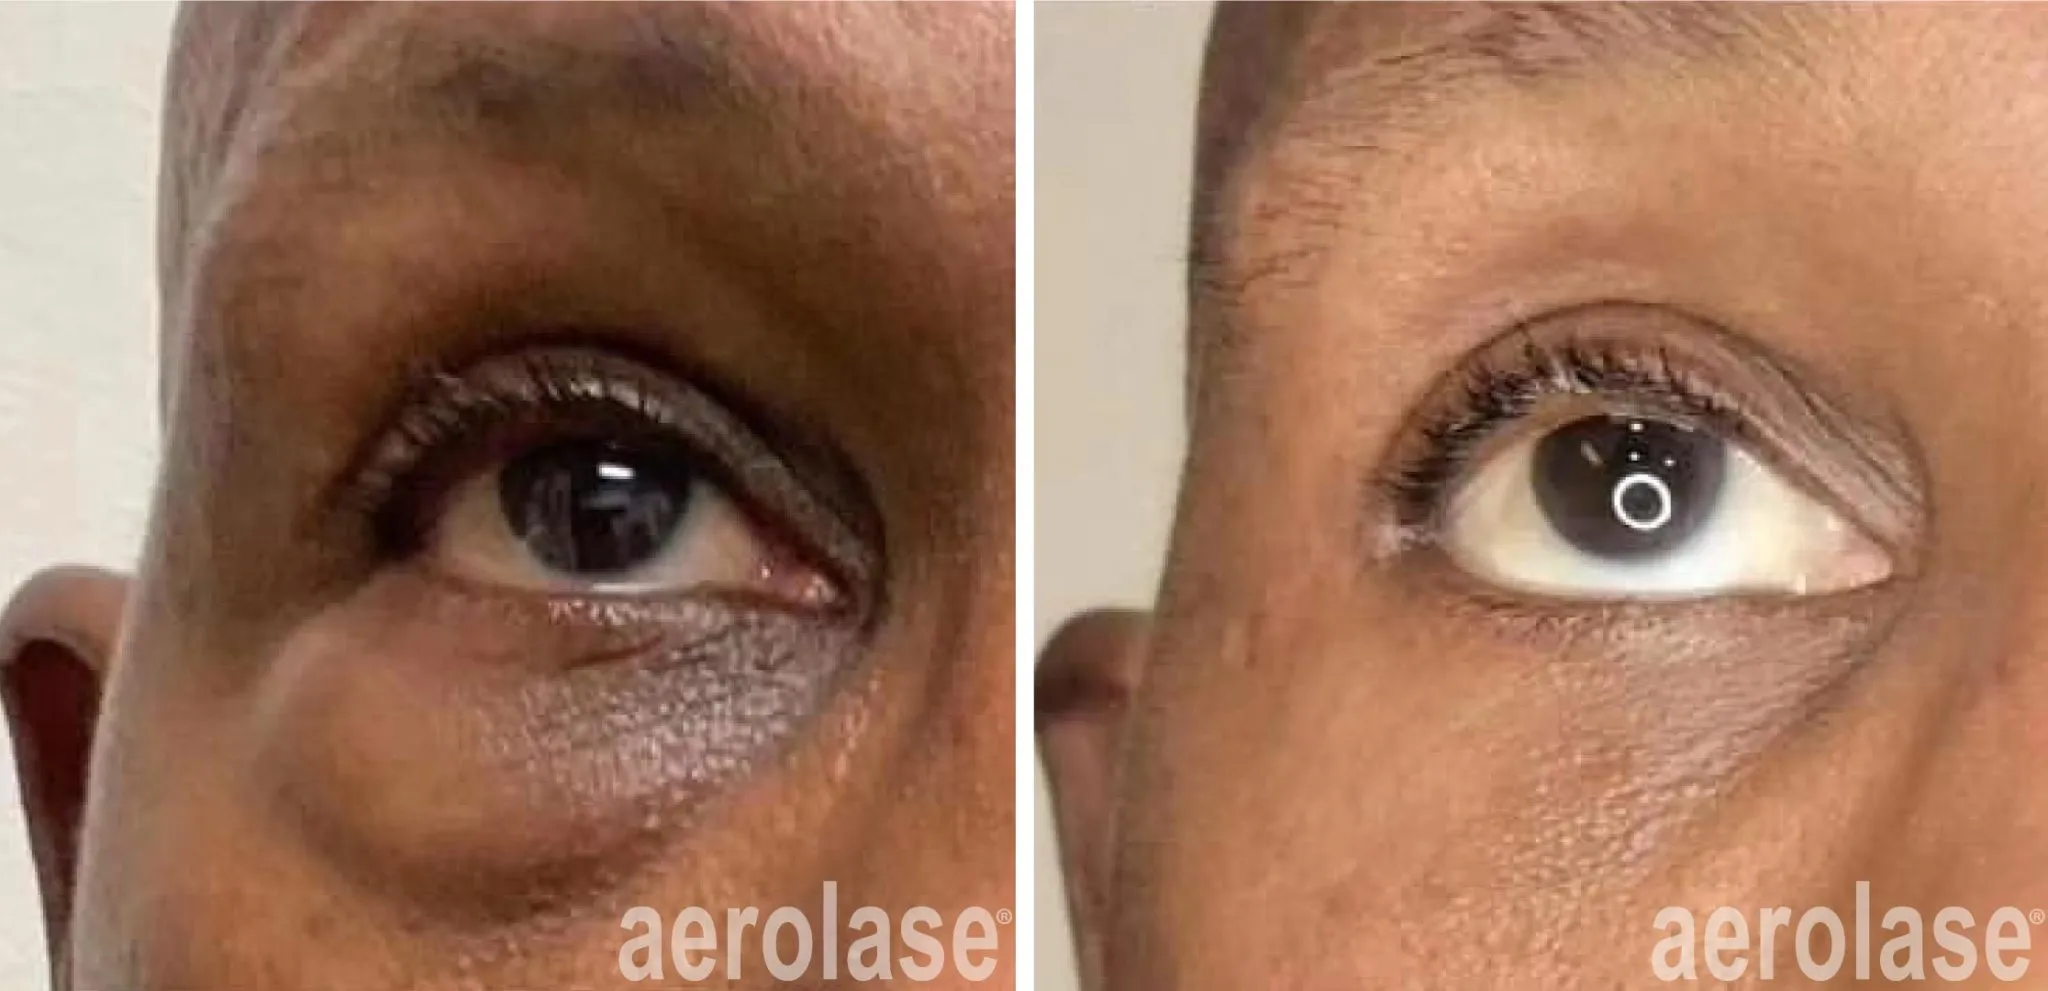 pigmentation-and-lower-eyelid-surgery-camille-cash-md-2048x991